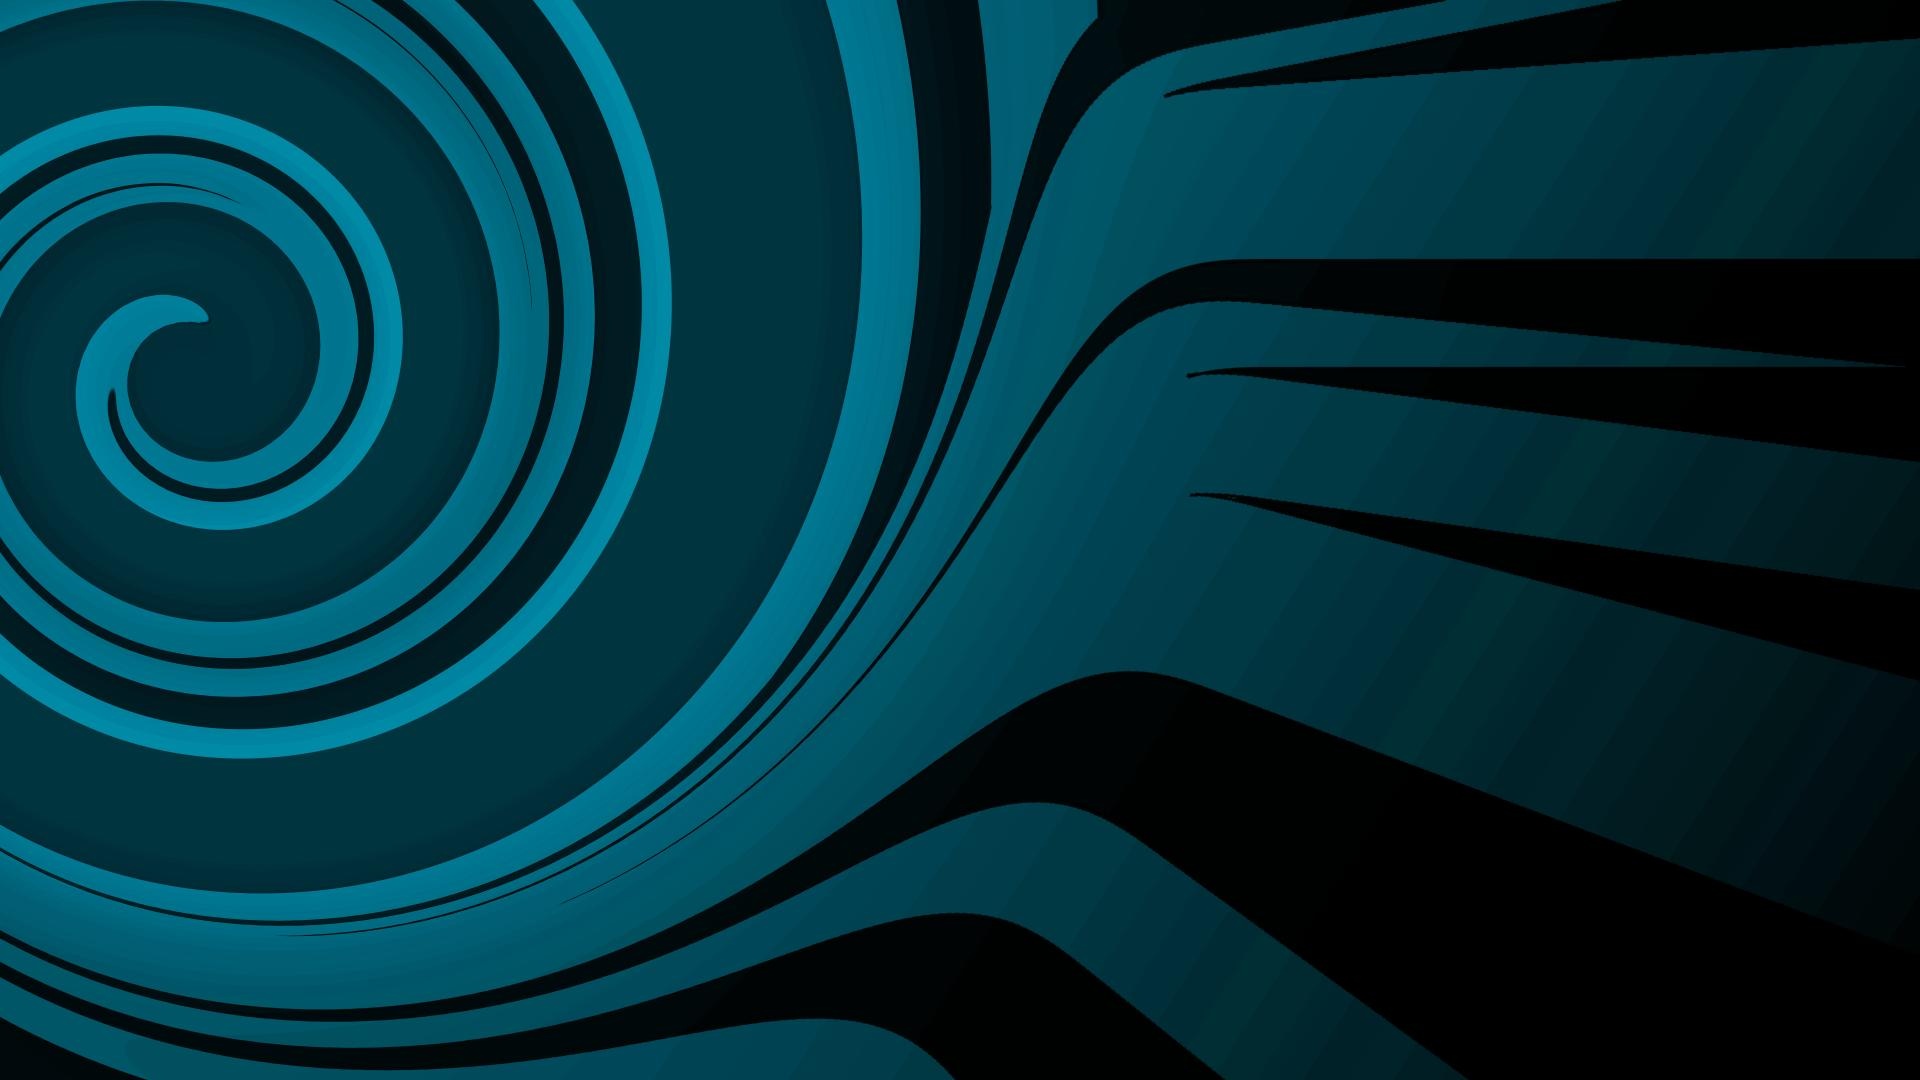 Blue And Black Abstract Wallpapers - 1920x1080 - 202362